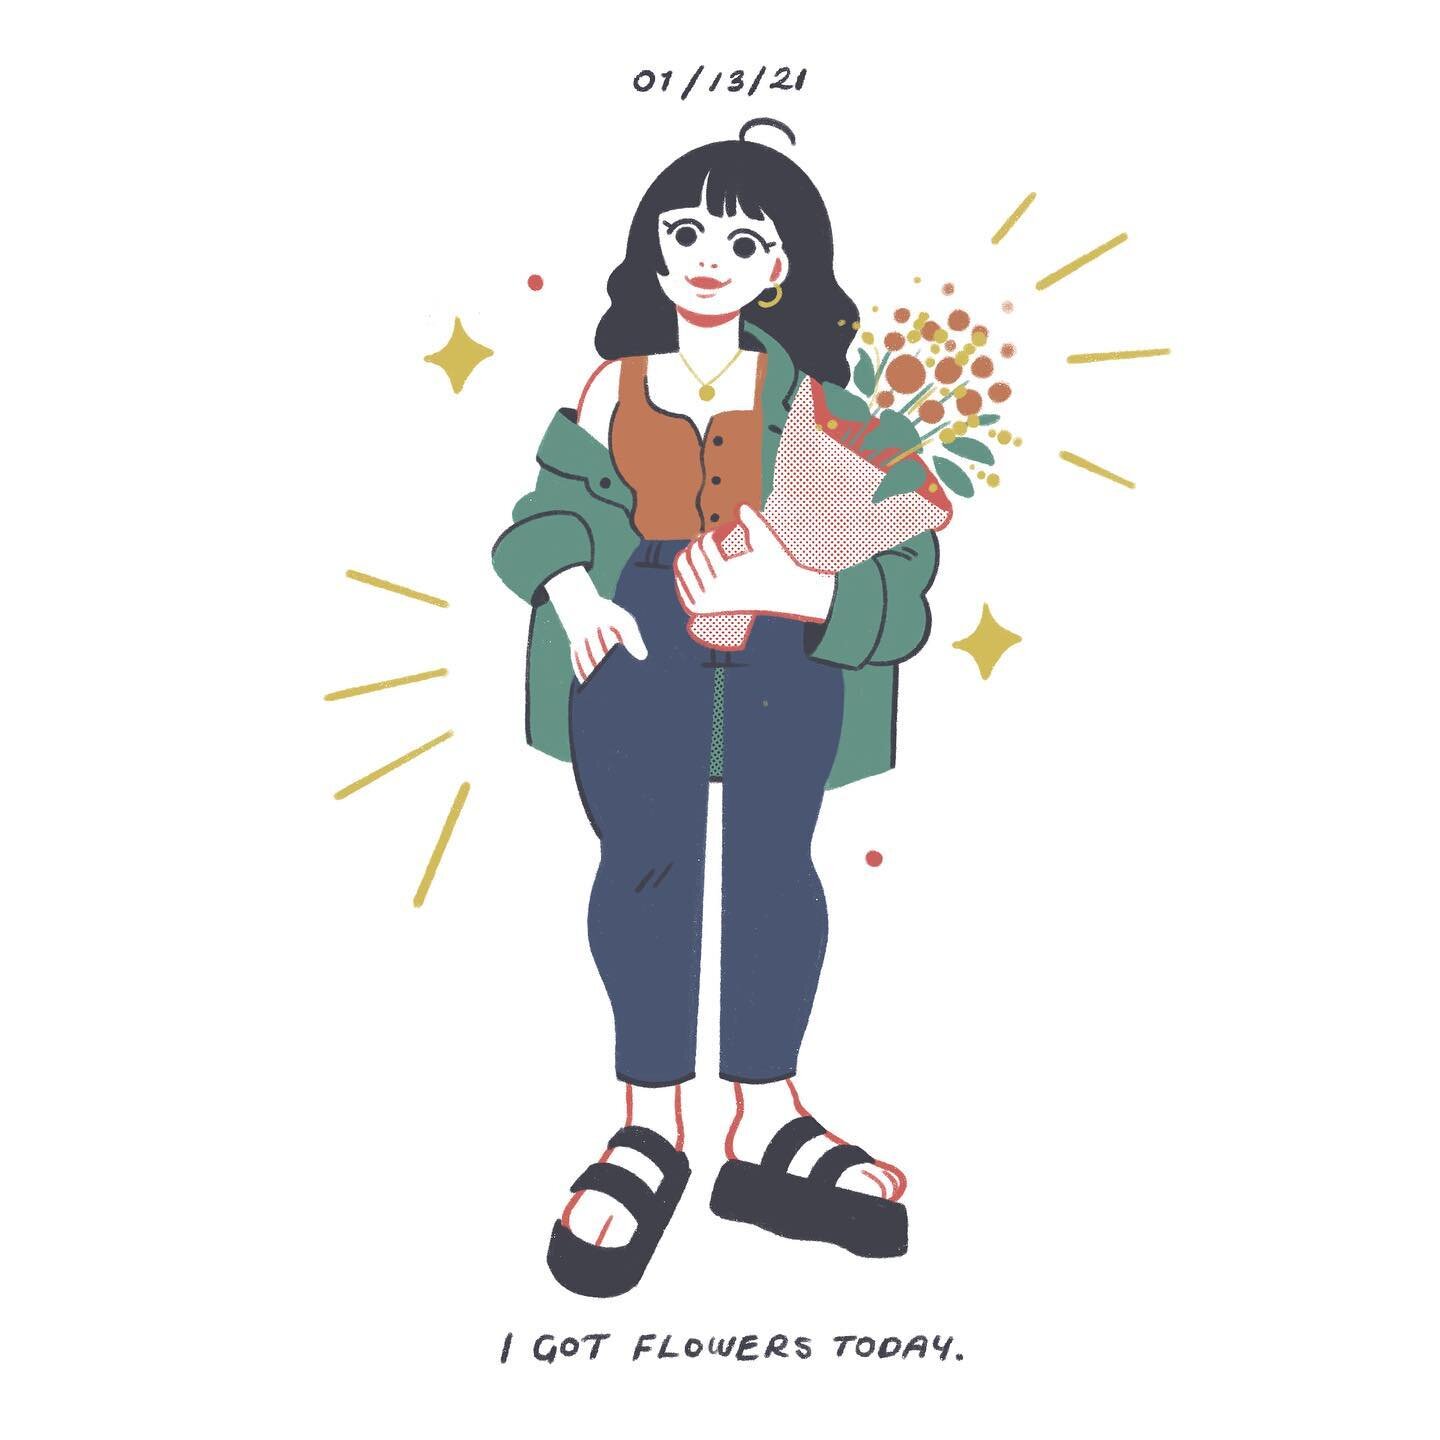 diary illo / 01.13.2021 - first of the year :)) i love 2 buy flowers if i&rsquo;m having a rough time n need a lil cheering up, it makes empty spaces in my apartment feel a lil happier 🌿🌱🌼
⠀⠀⠀⠀⠀⠀⠀⠀⠀

⠀⠀⠀⠀⠀⠀⠀⠀⠀

⠀⠀⠀⠀⠀⠀⠀⠀⠀
#artph #girl #illo #illust